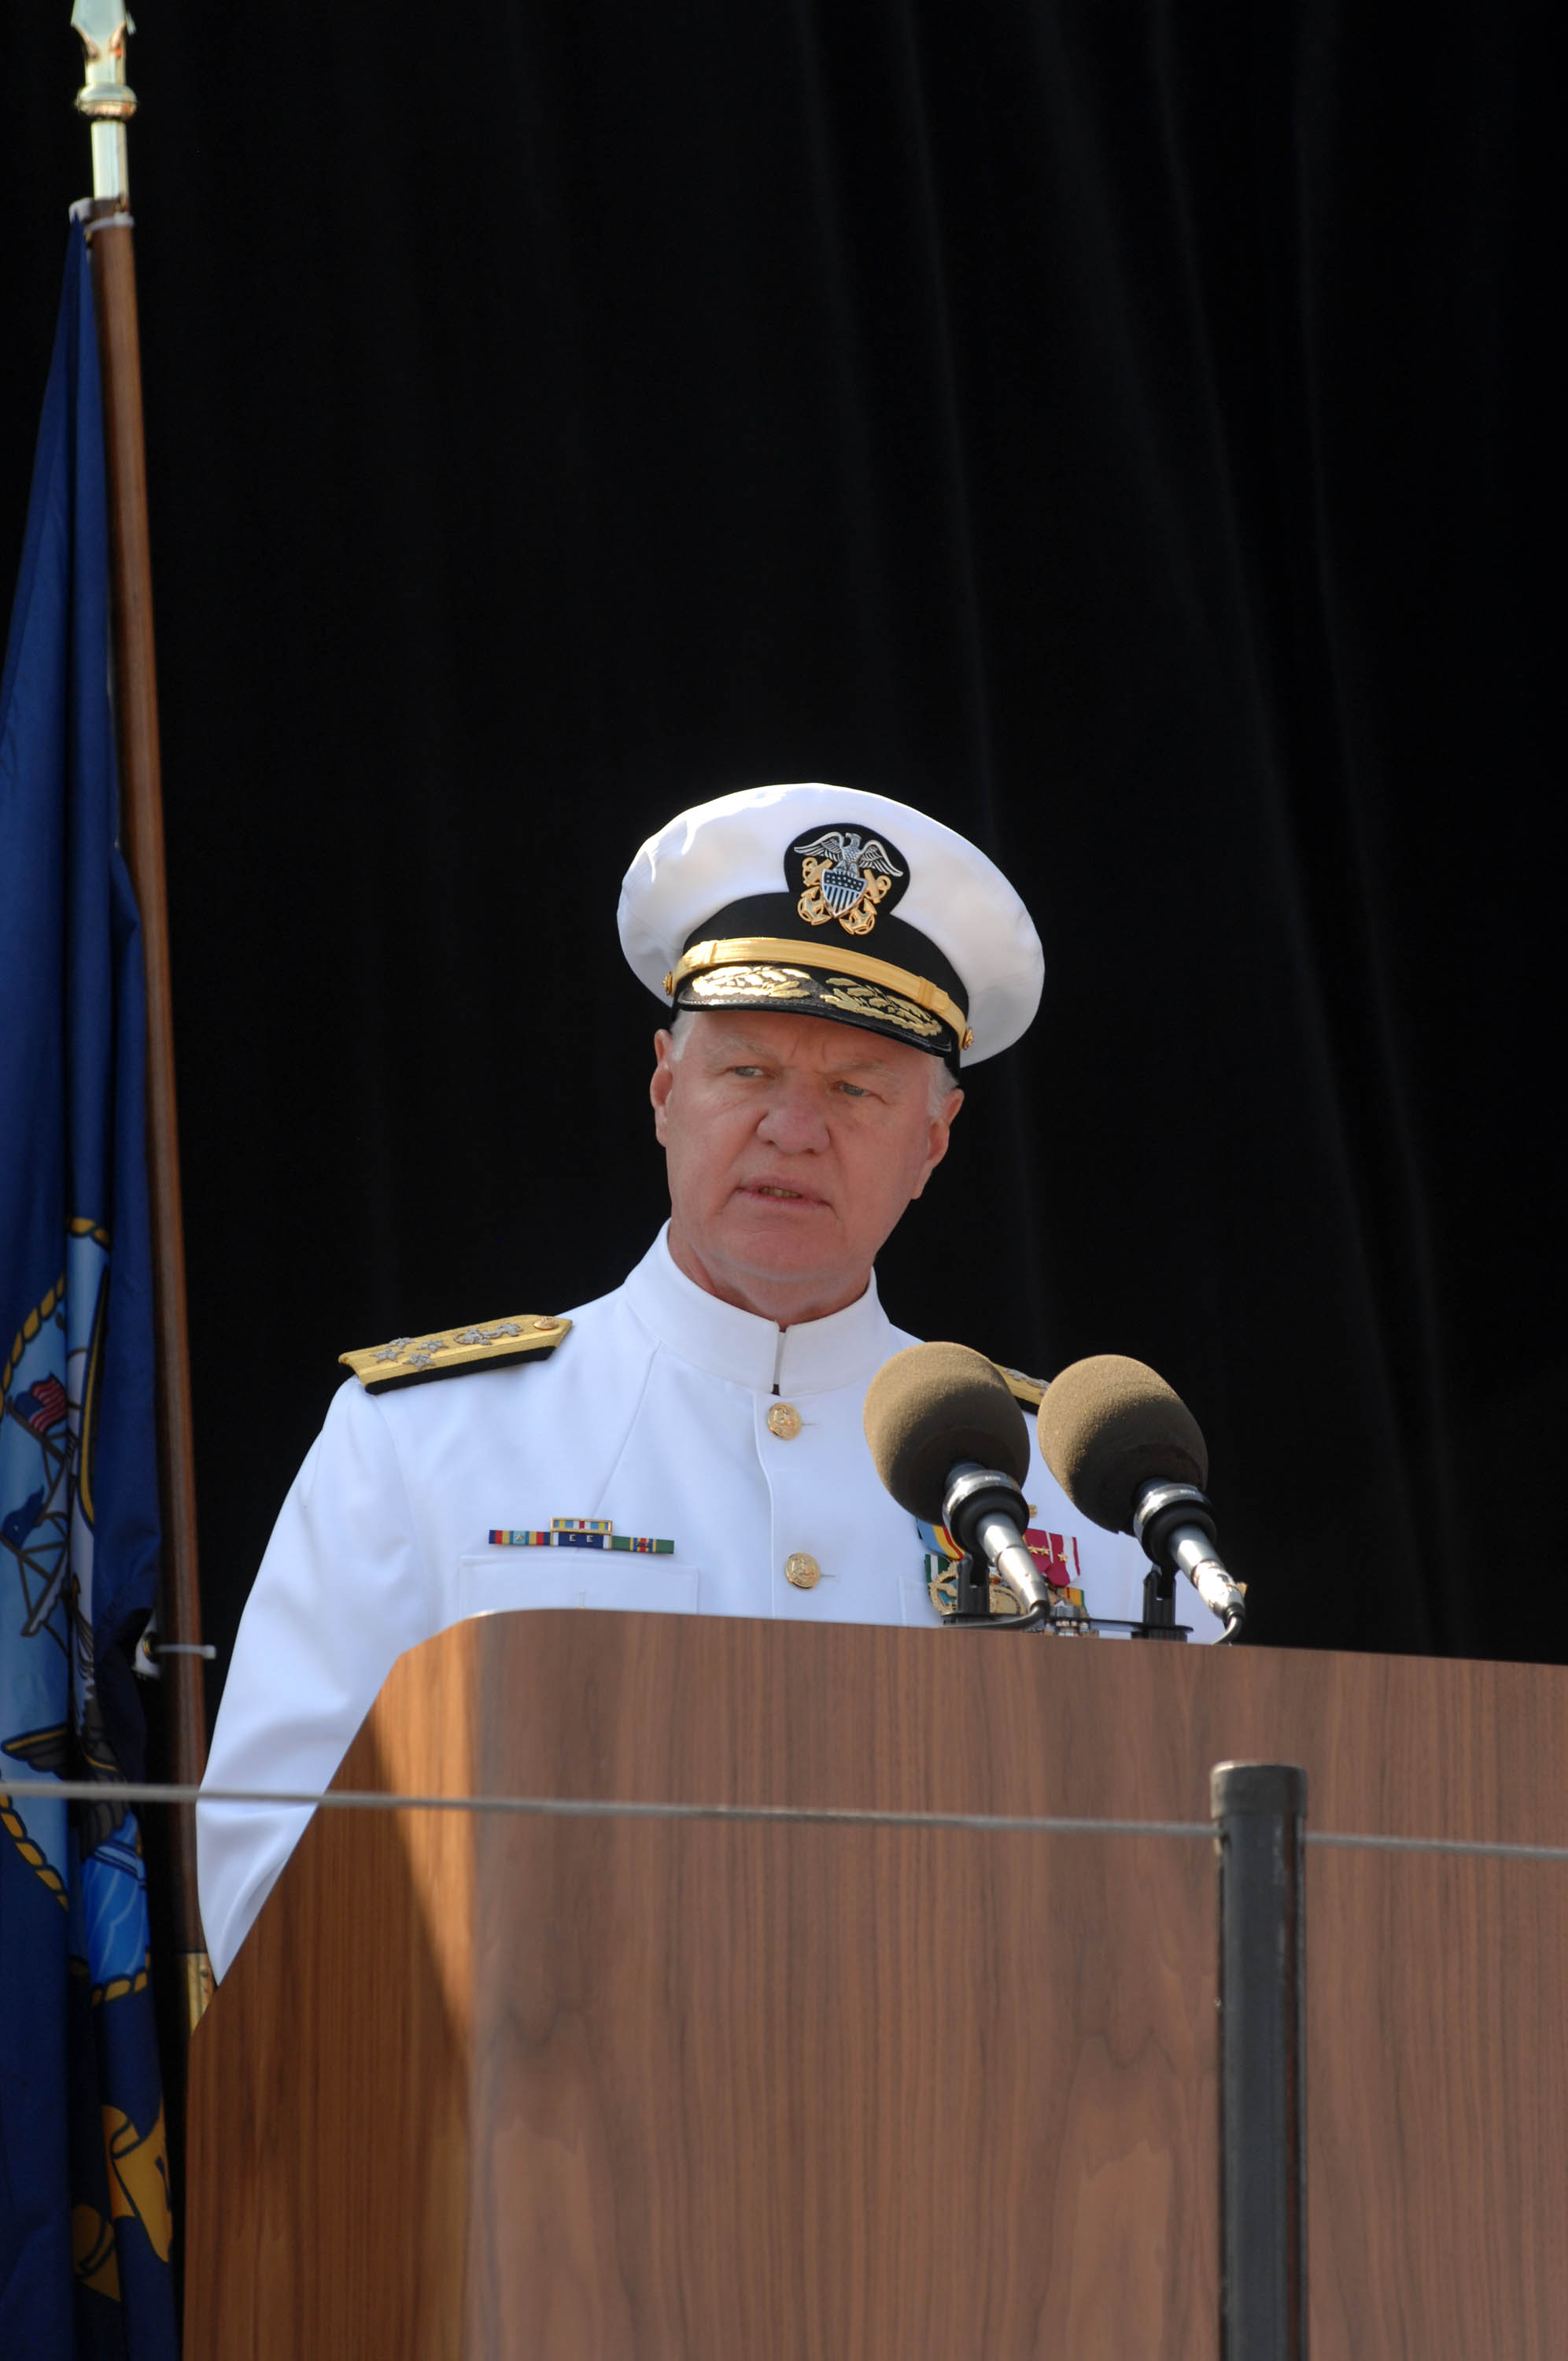 US Navy 080918-N-8273J-078 Chief of Naval Operations (CNO) Adm. Gary Roughead delivers his remarks during the christening and launch ceremony of USNS Carl Brashear (T-AKE 7) at General Dynamics NASSCO shipyard